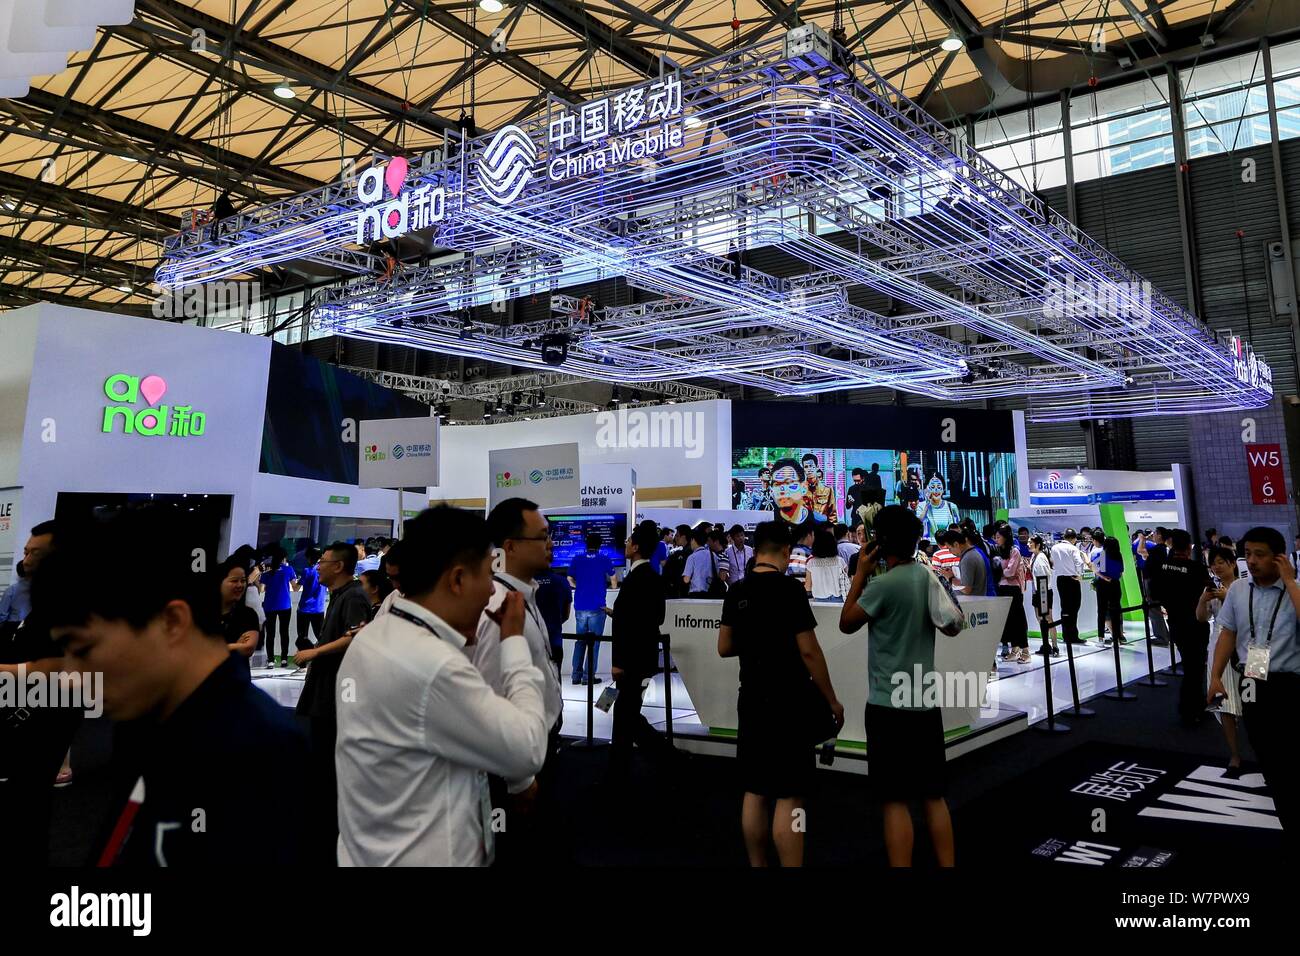 Visitors crowd the stand of China Mobile during the 2017 Mobile World Congress (MWC) in Shanghai, China, 28 June 2017.   The Mobile World Congress 201 Stock Photo